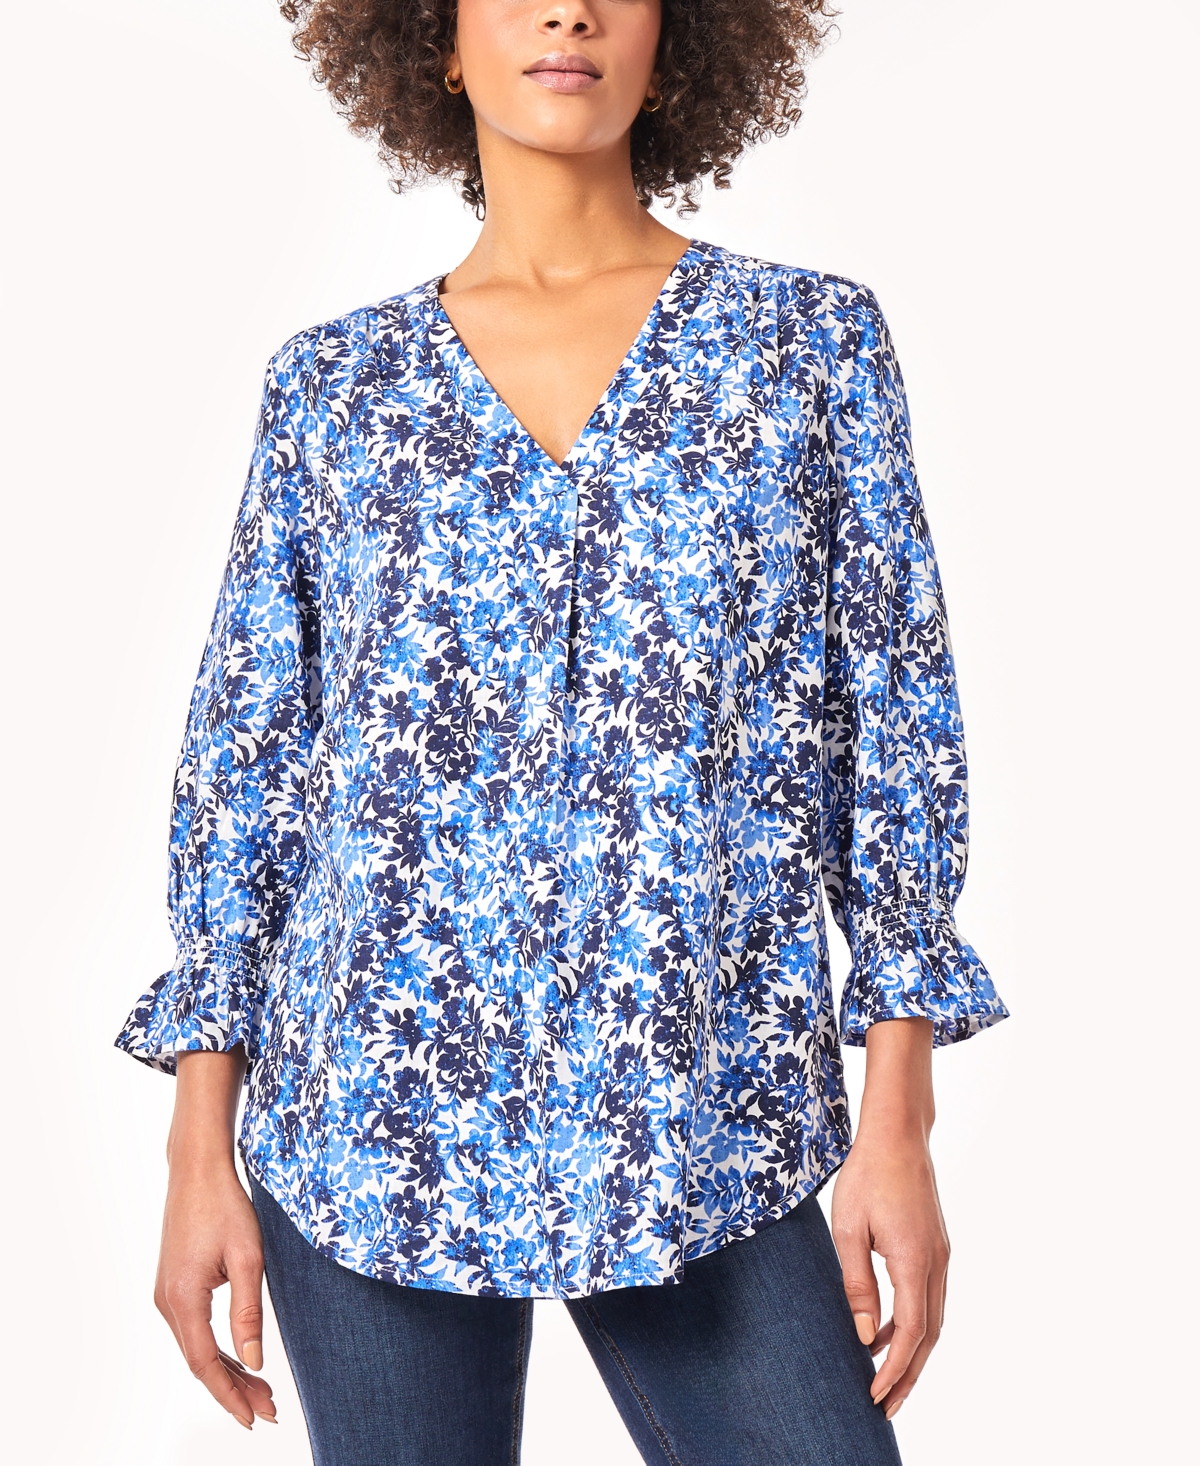 Women's Floral-Print Smocked-Cuff Pleat-Front Top - NYC White/Blue Horizon